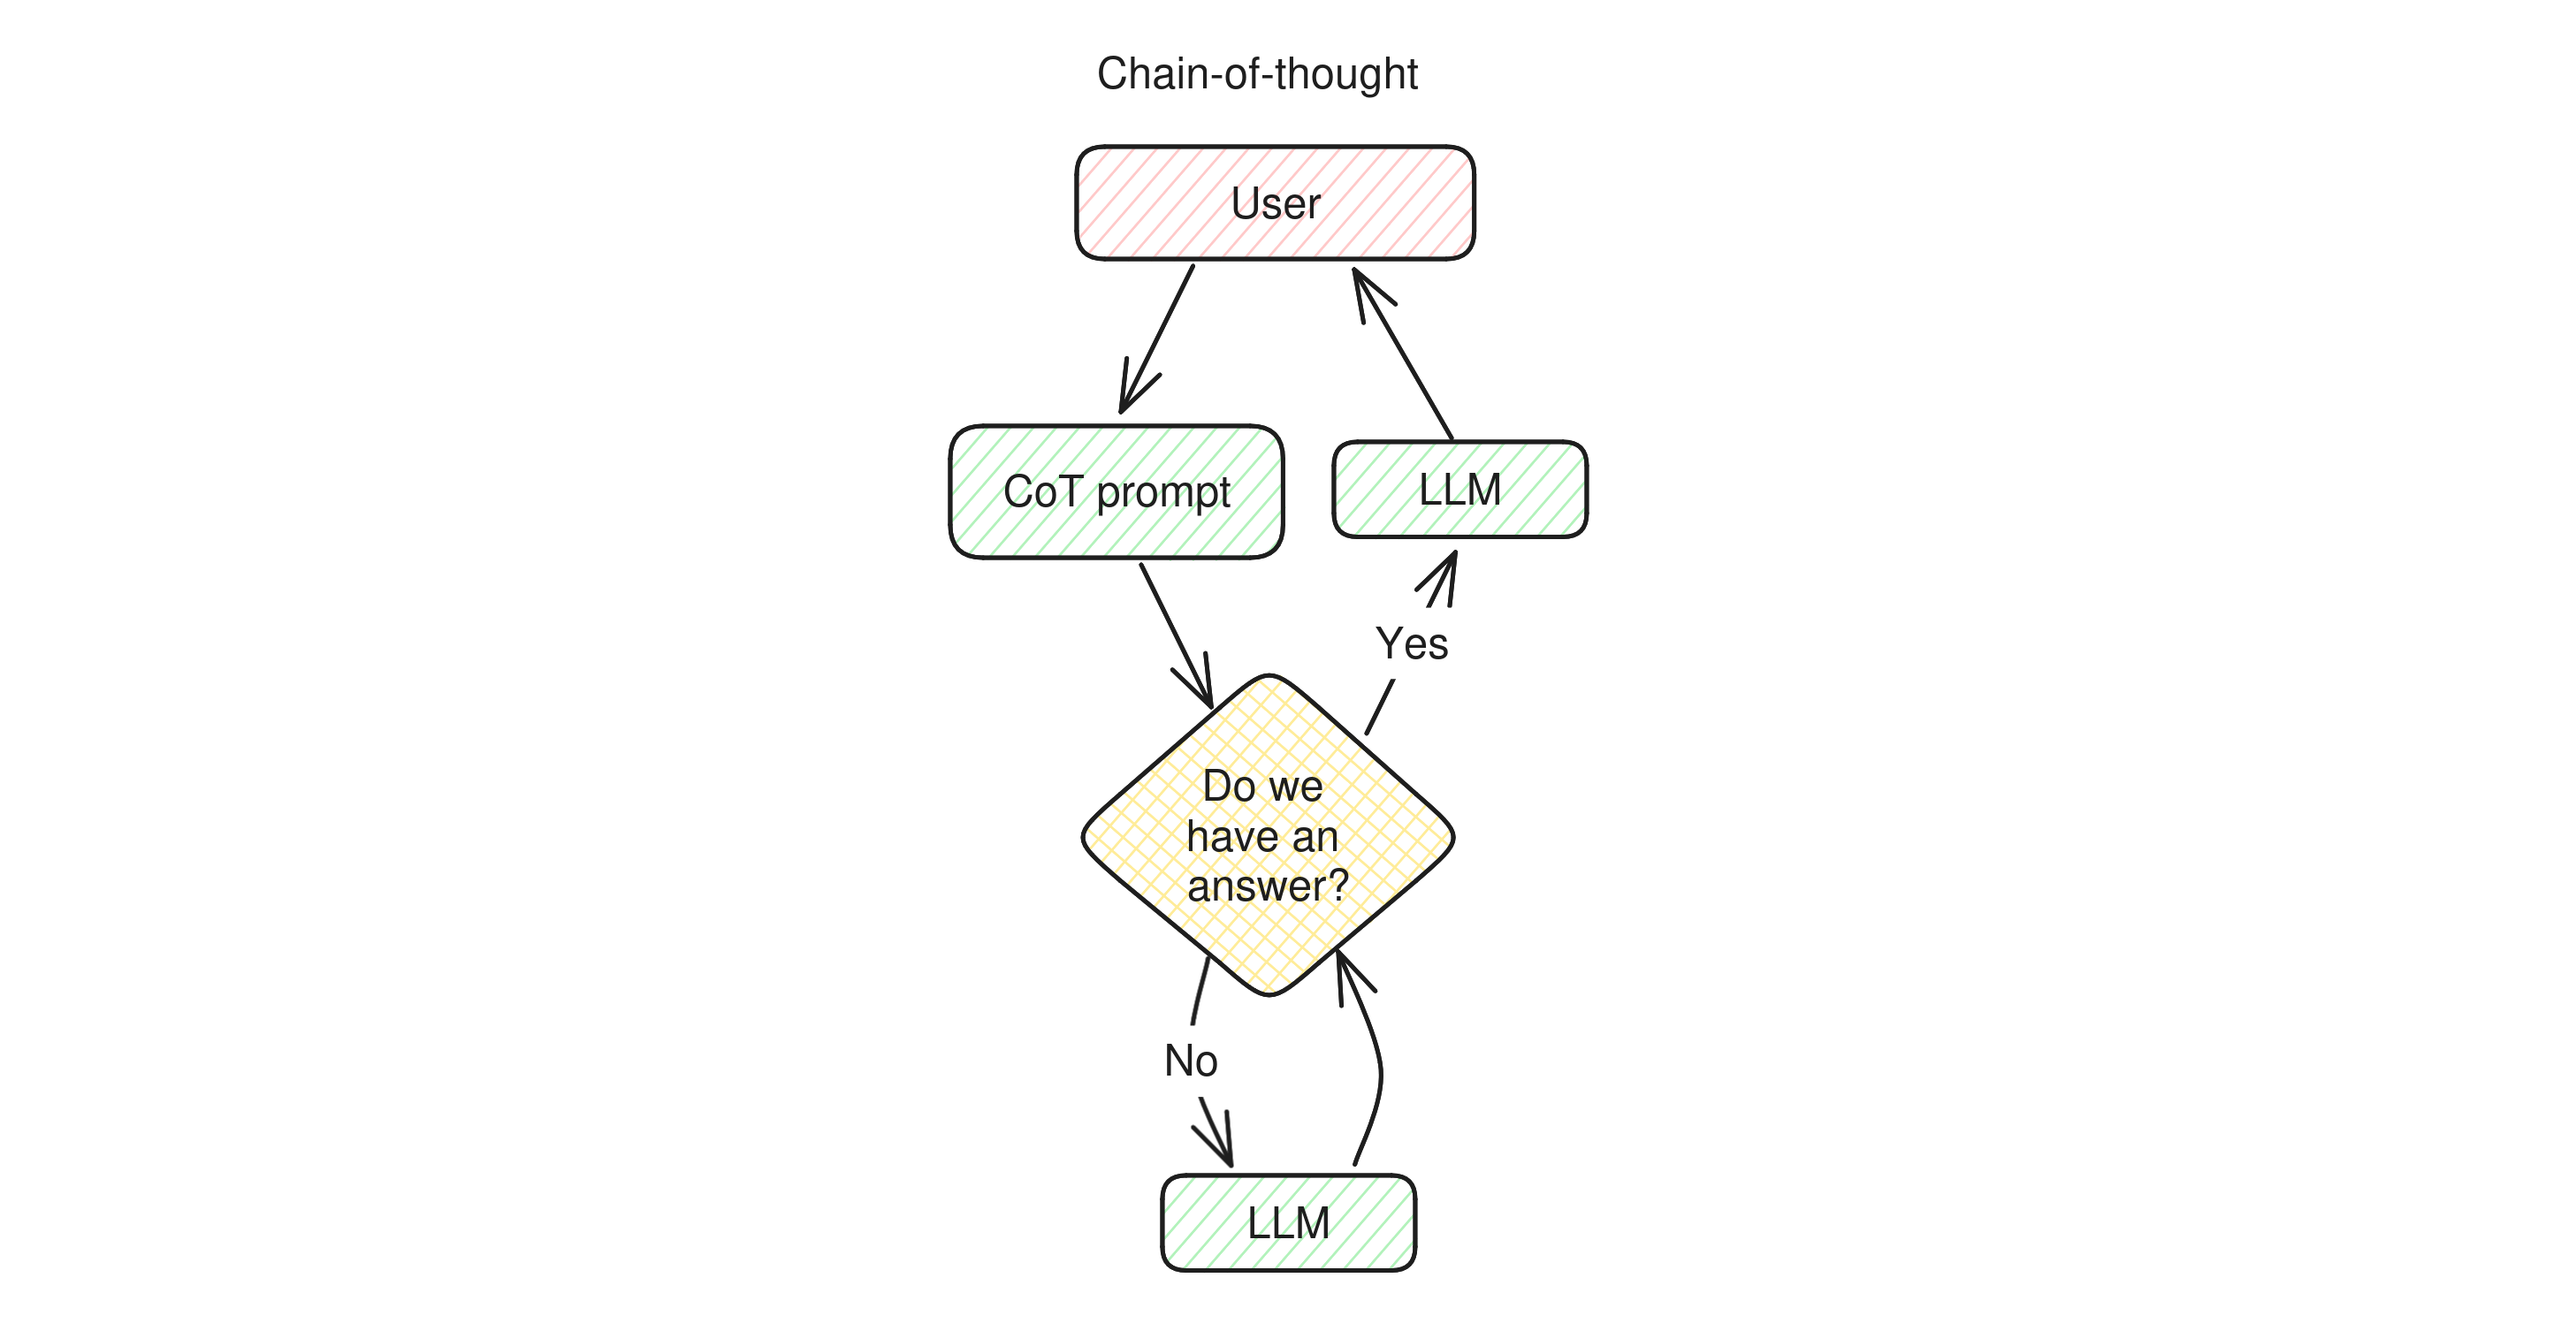 Diagram of the operation of a chain-of-thought LLM app: when a user asks a question, first of all the LLM reacts to the chain-of-thought prompt to lay out the sub-questions it needs to answer. Then it answers its own questions one by one, asking itself each time whether the final answer has already been found. When the LLM believes it has the final answer, it rewrites it for the user and returns it 